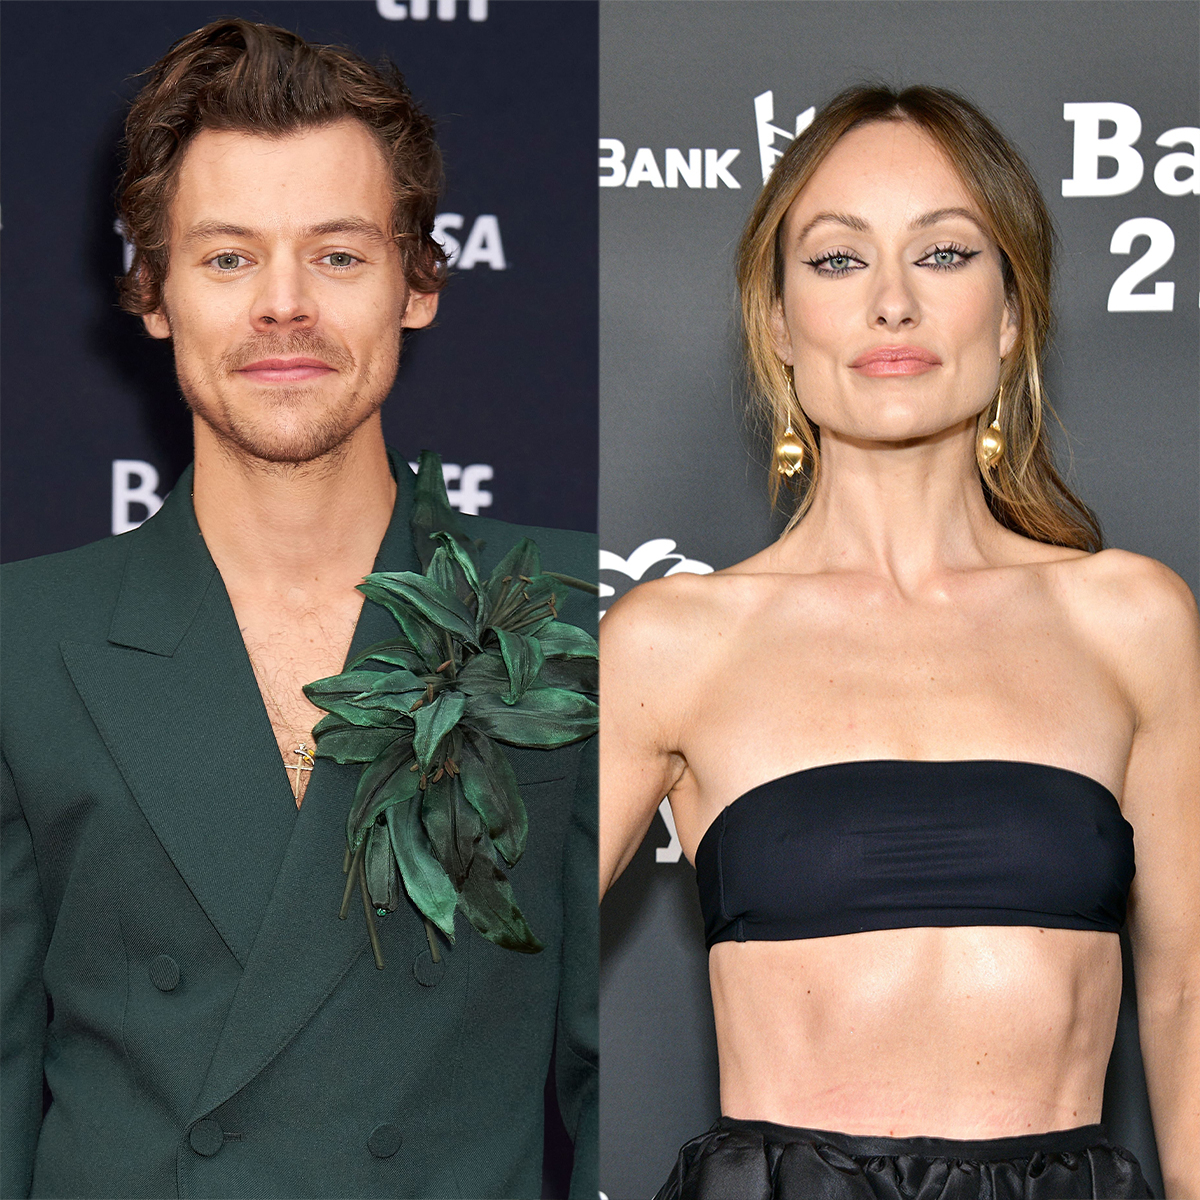 https://akns-images.eonline.com/eol_images/Entire_Site/20221016/rs_1200x1200-221116182137-_Harry-Styles-and-Olivia-Wilde-2.jpg?fit=around%7C1200:1200&output-quality=90&crop=1200:1200;center,top